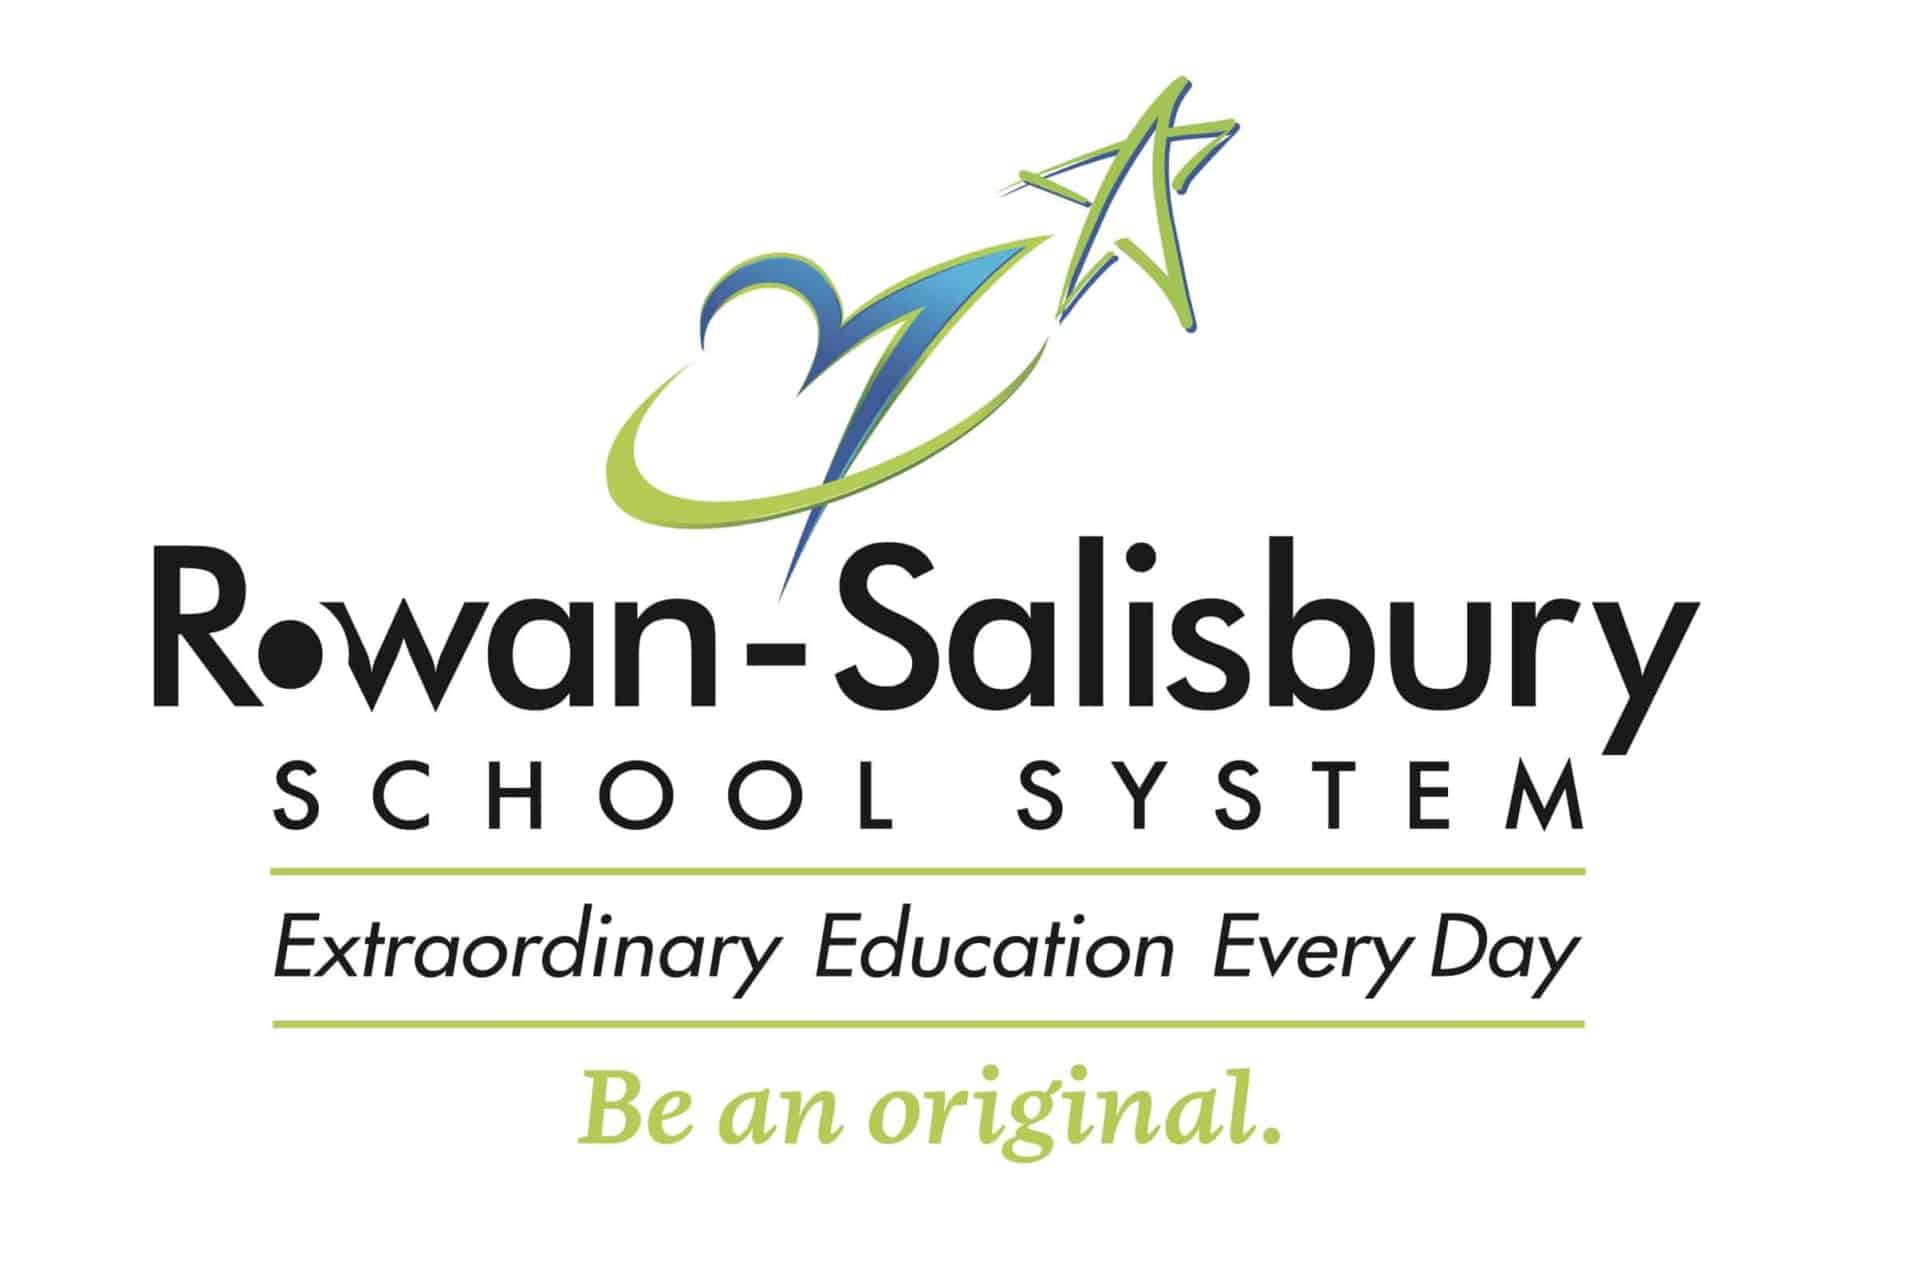 What do you think of the Rowan Salisbury school consolidation plan